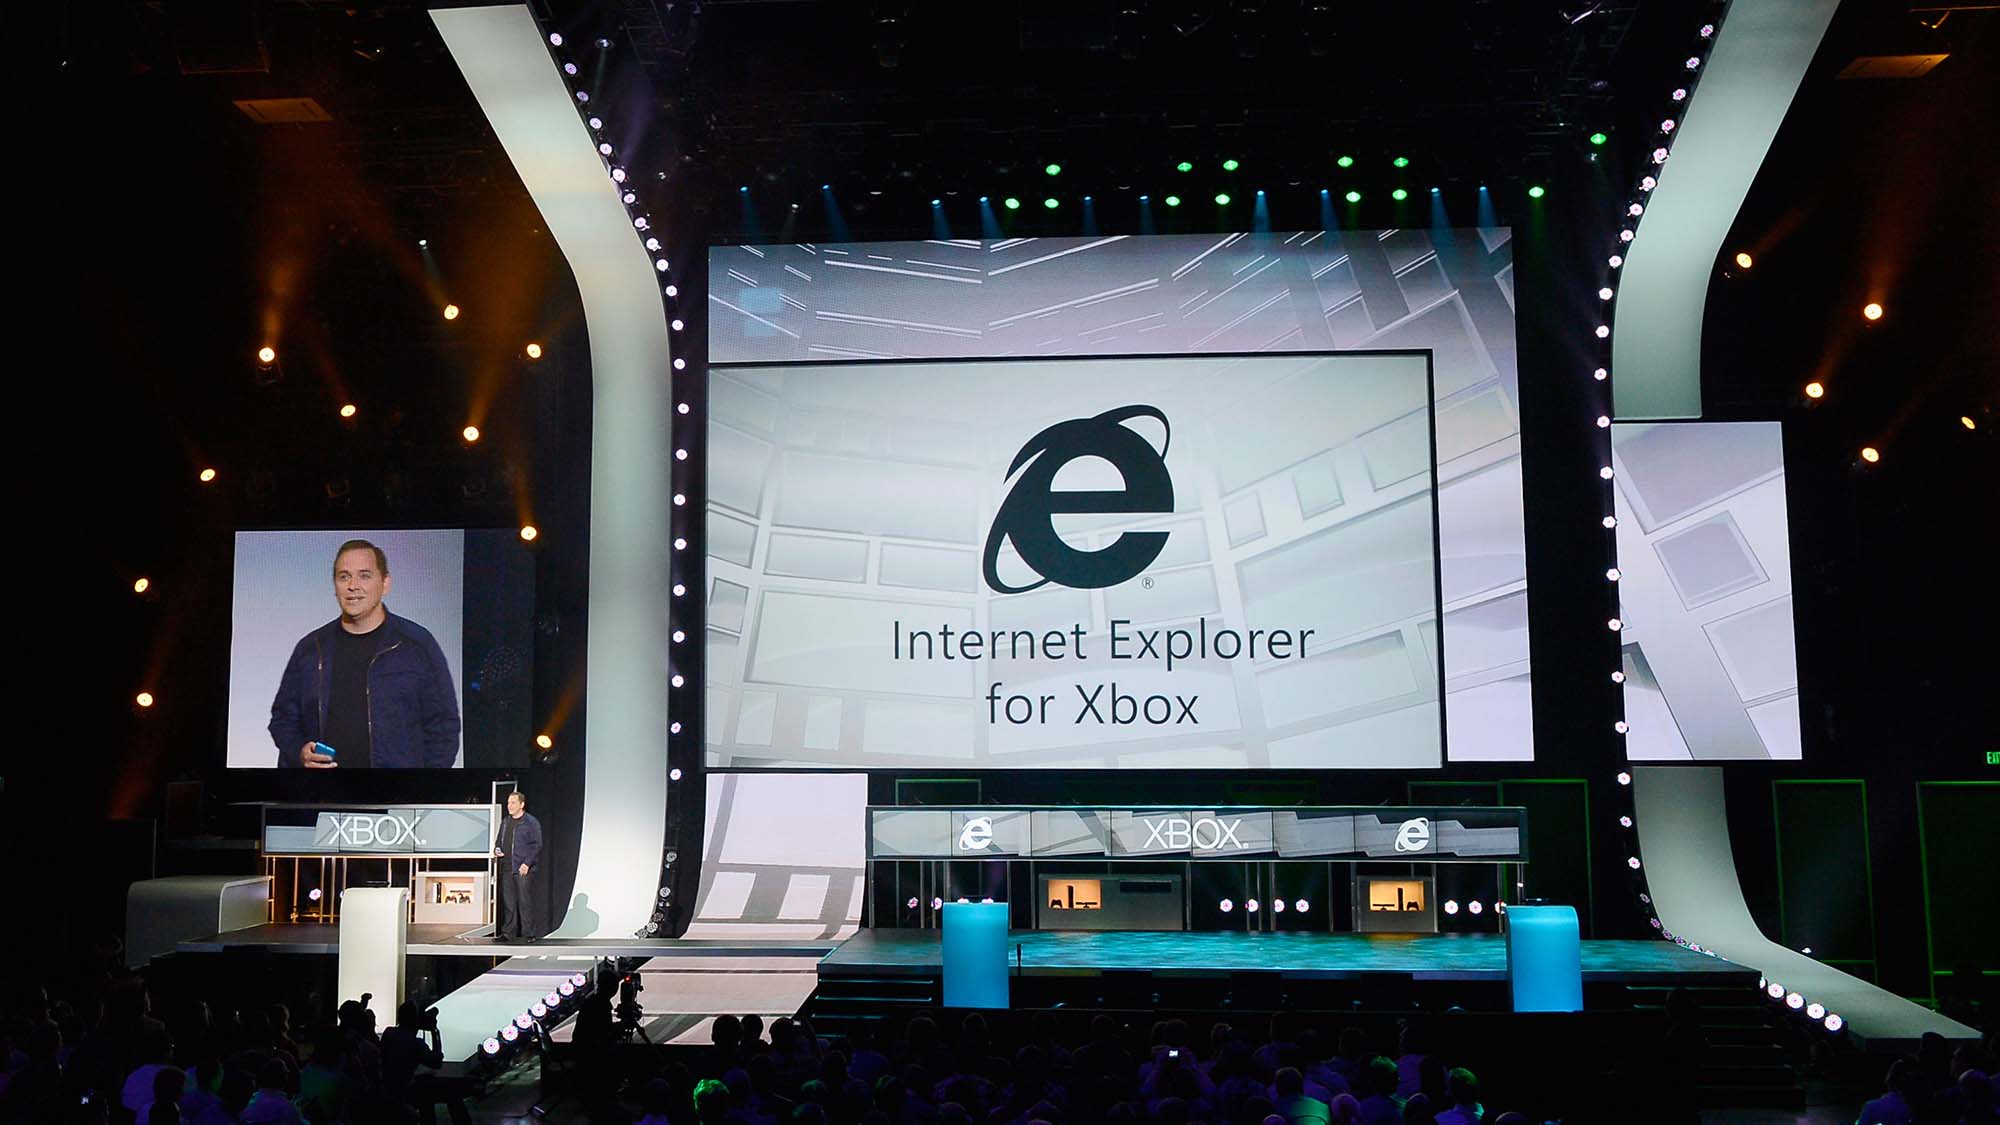 Xbox Live executive Marc Whitten introduces Internet Explorer for Xbox during the Microsoft Xbox press conference at the Electronic Entertainment Expo